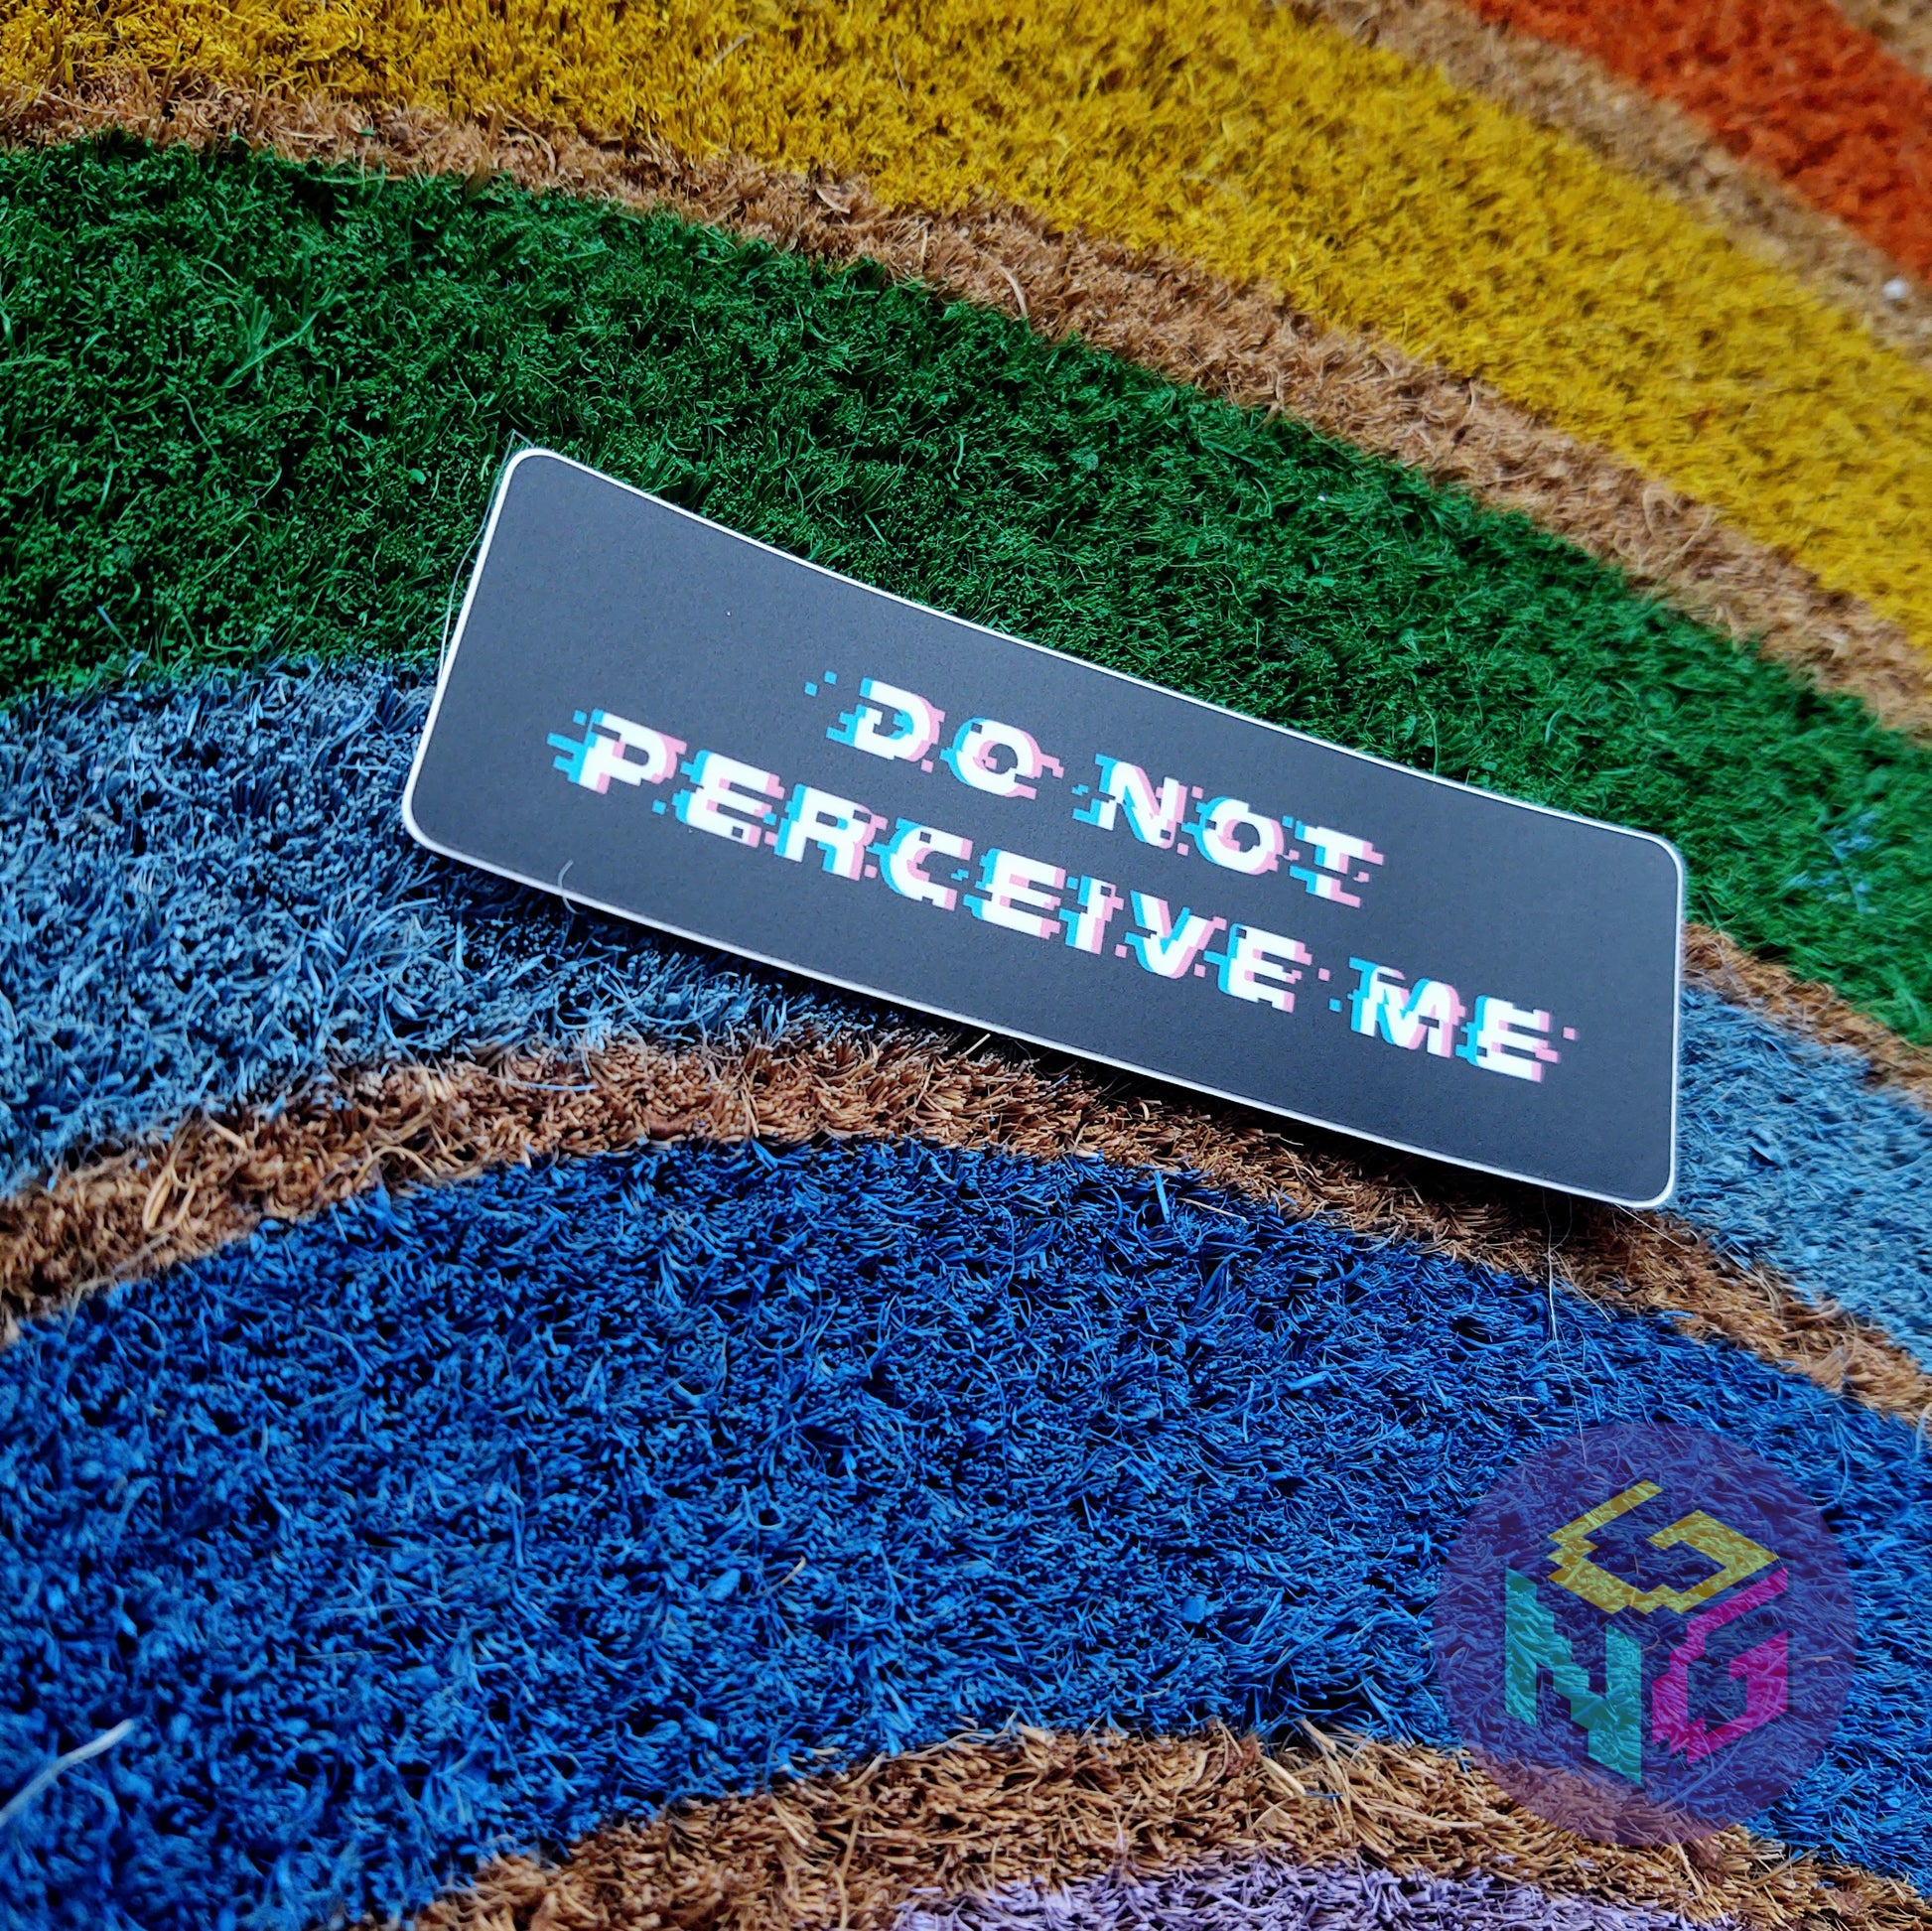 do not perceive me sticker lying at an angle on a rainbow welcome mat